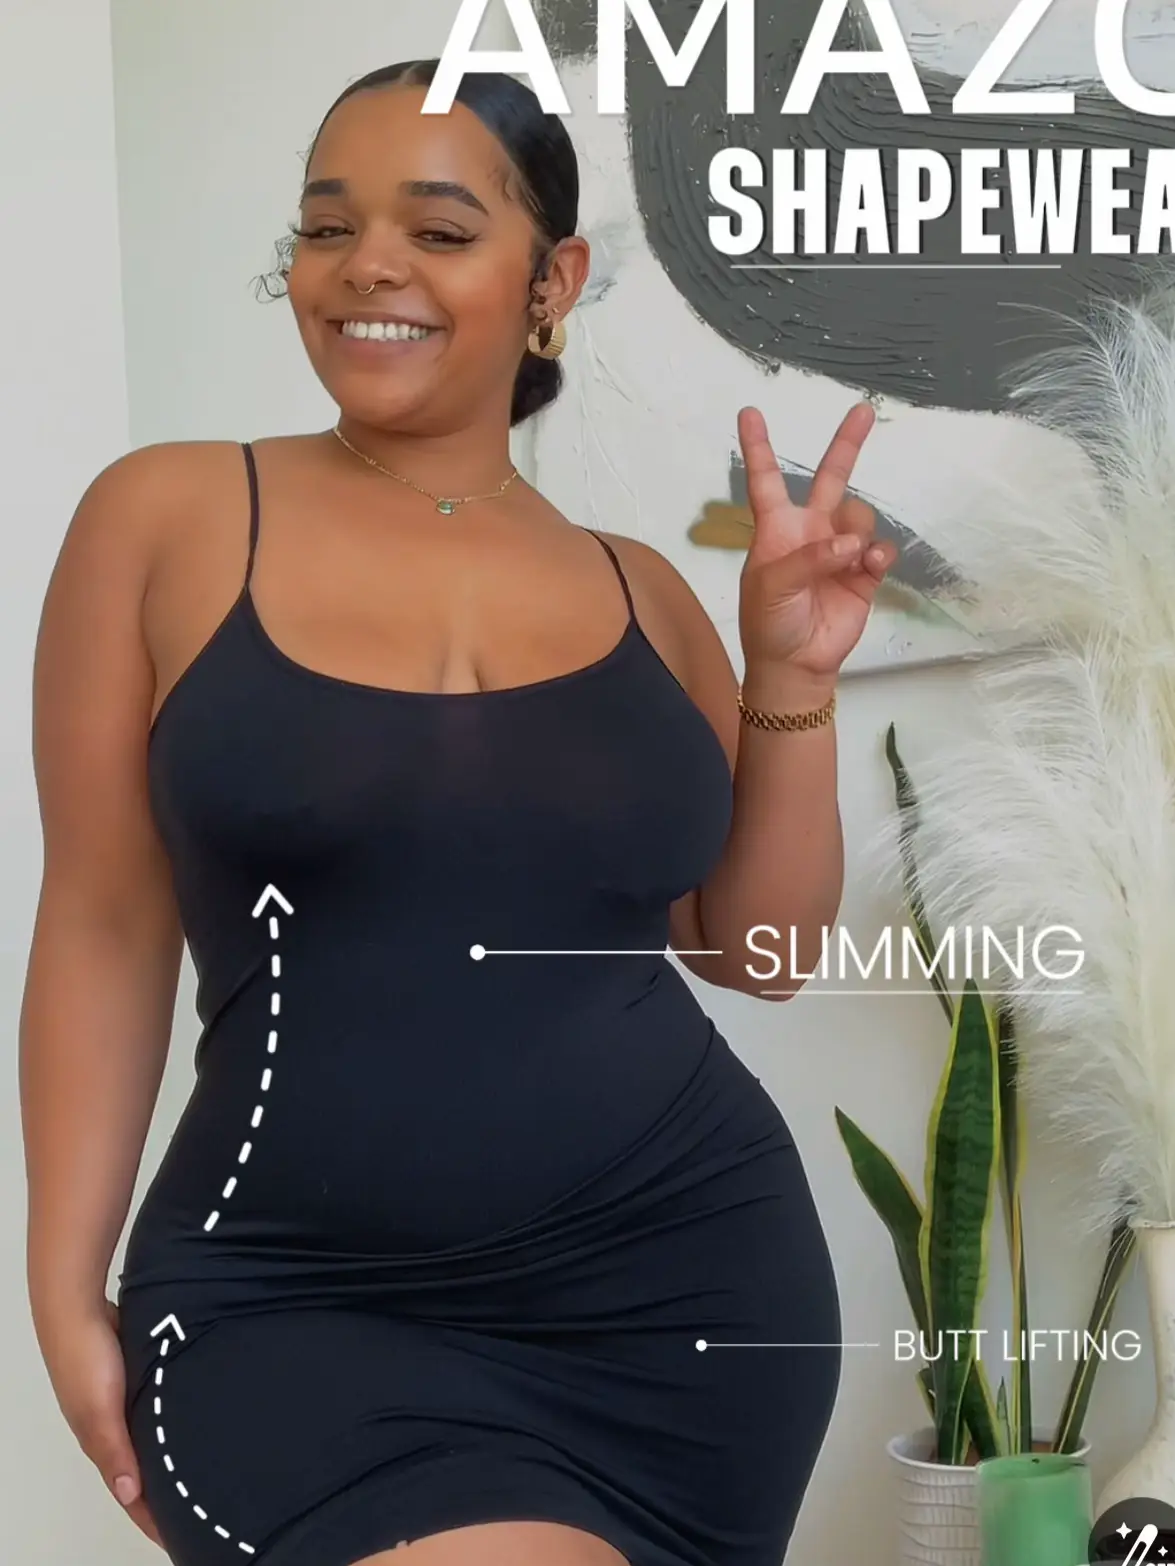 Elevate your wardrobe this Spring with unmatched comfort and support in @ shapermint shapewear. ❤️ Because confidence and style start